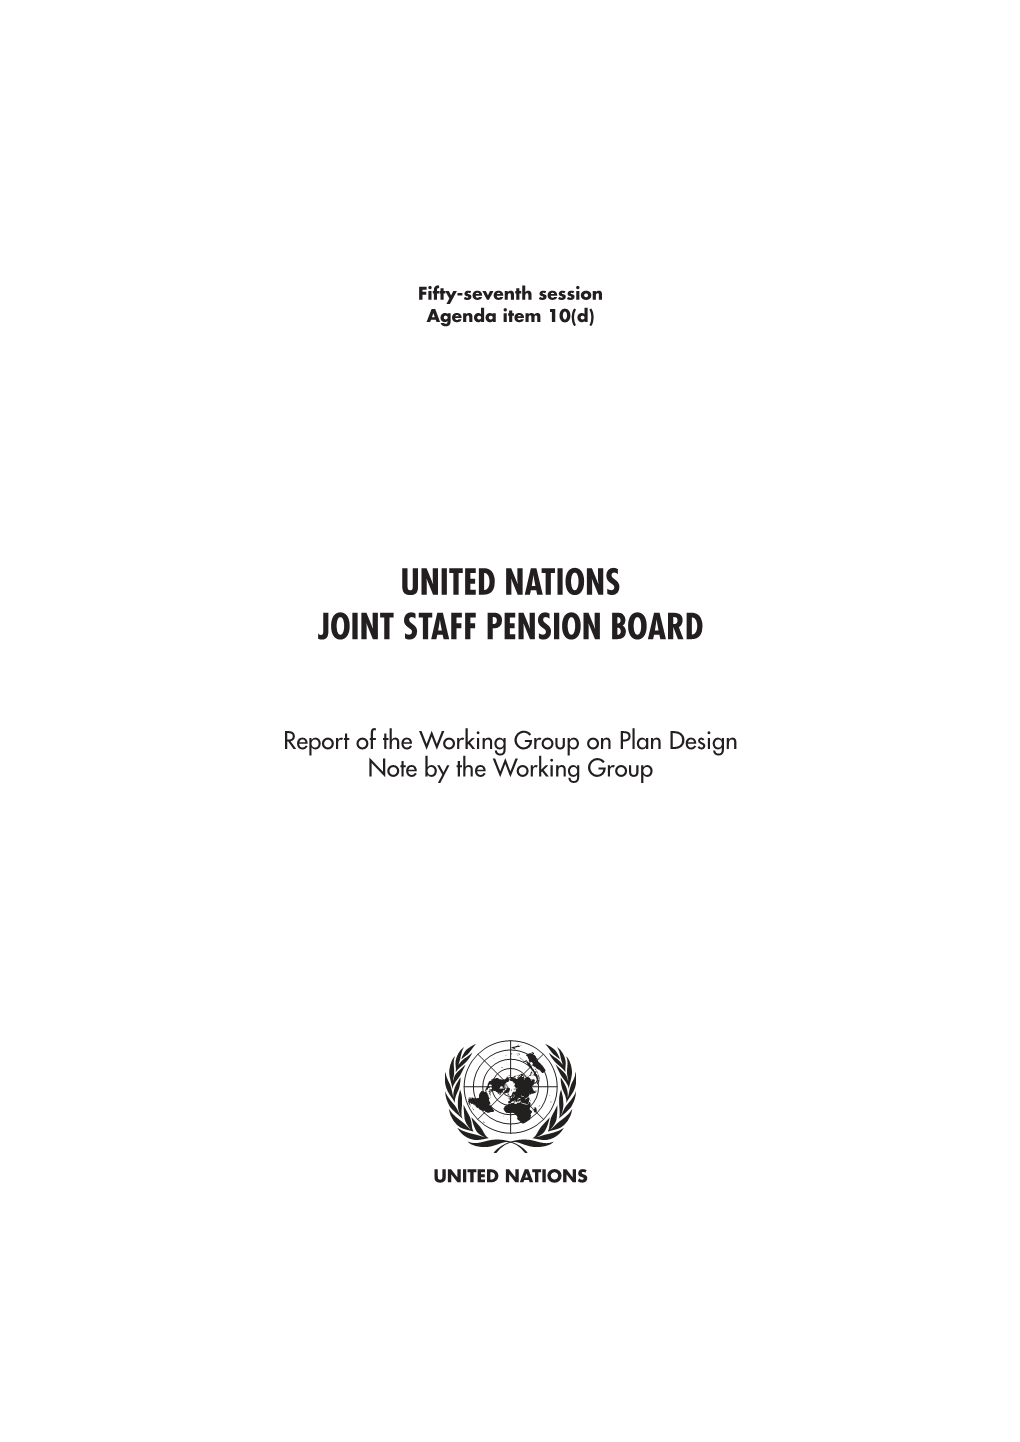 United Nations Joint Staff Pension Board